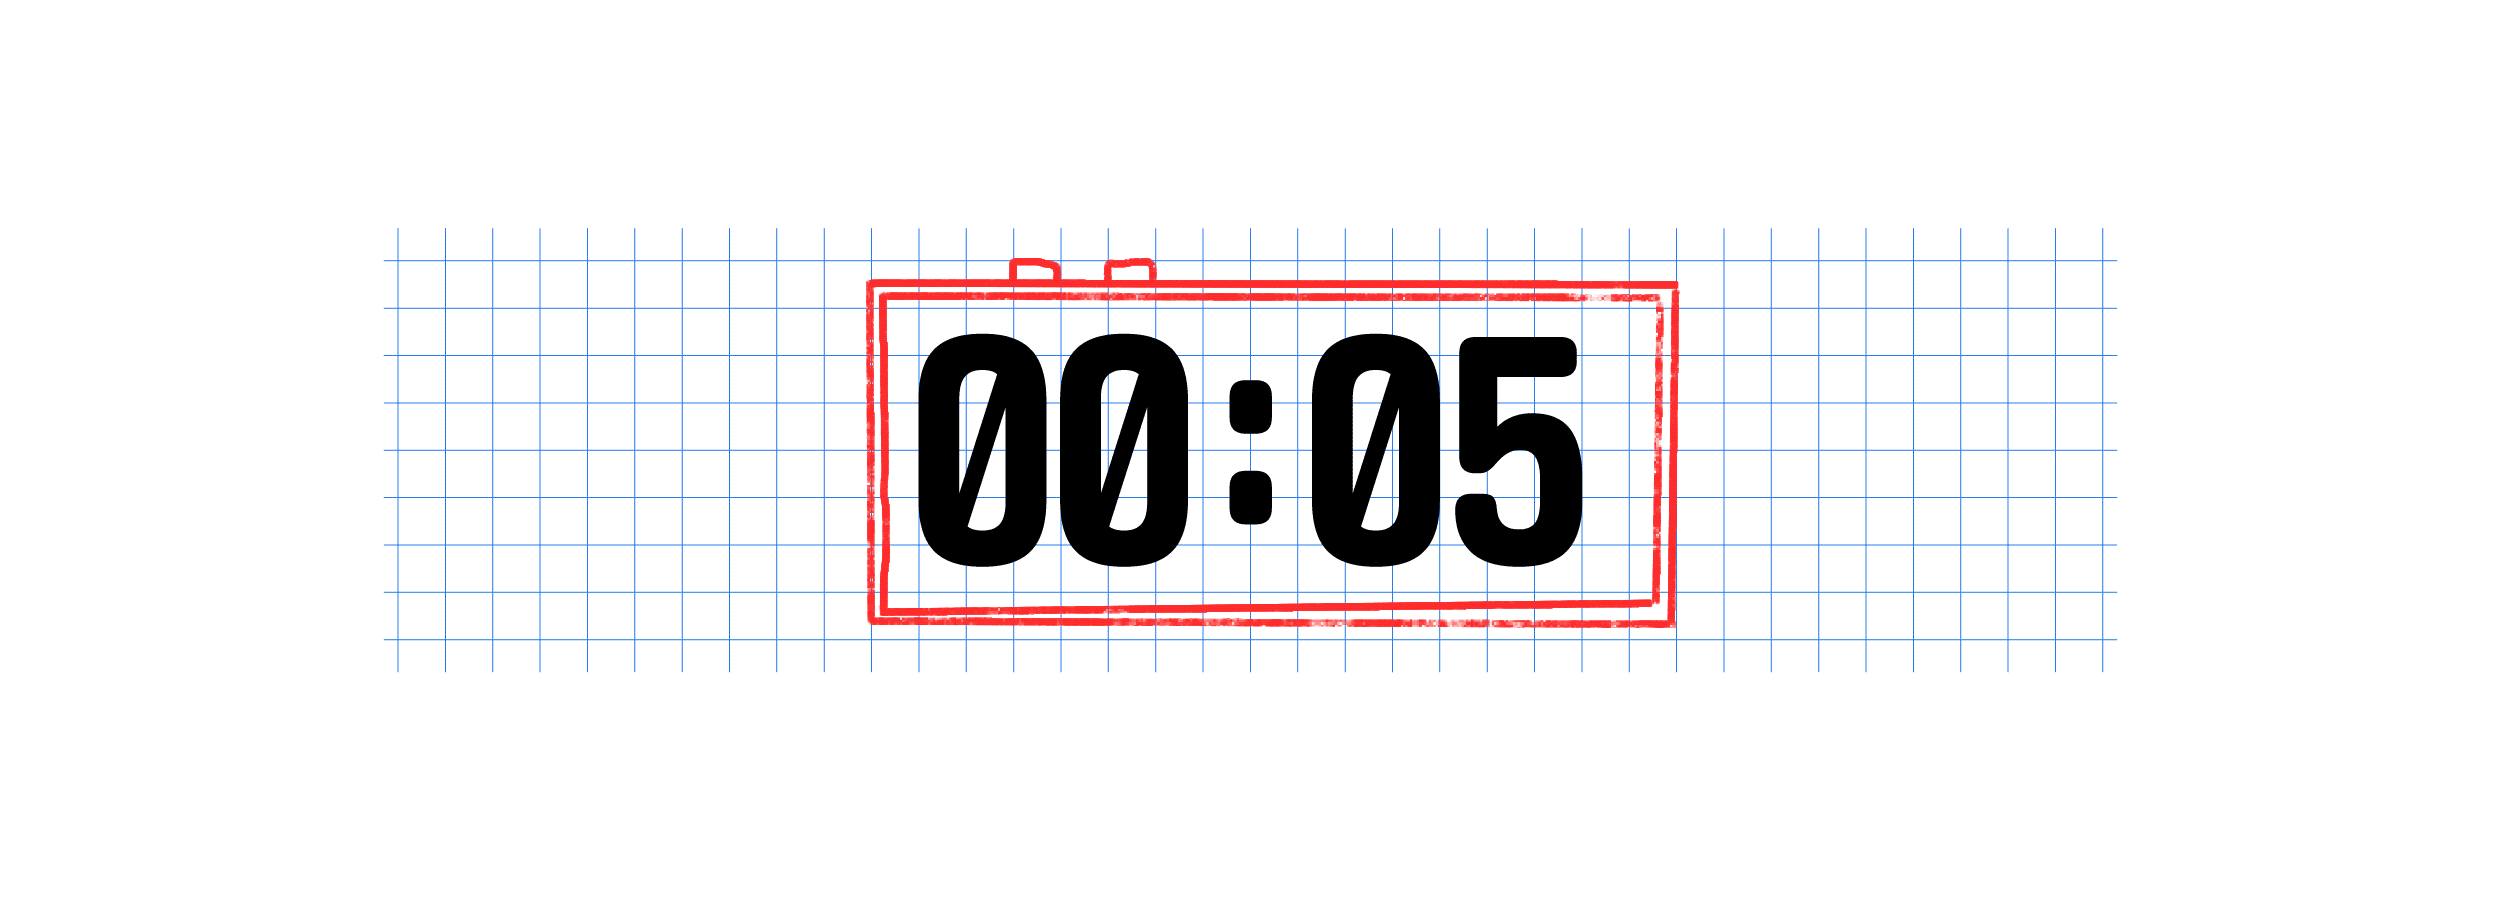 Digital clock counting down from five seconds